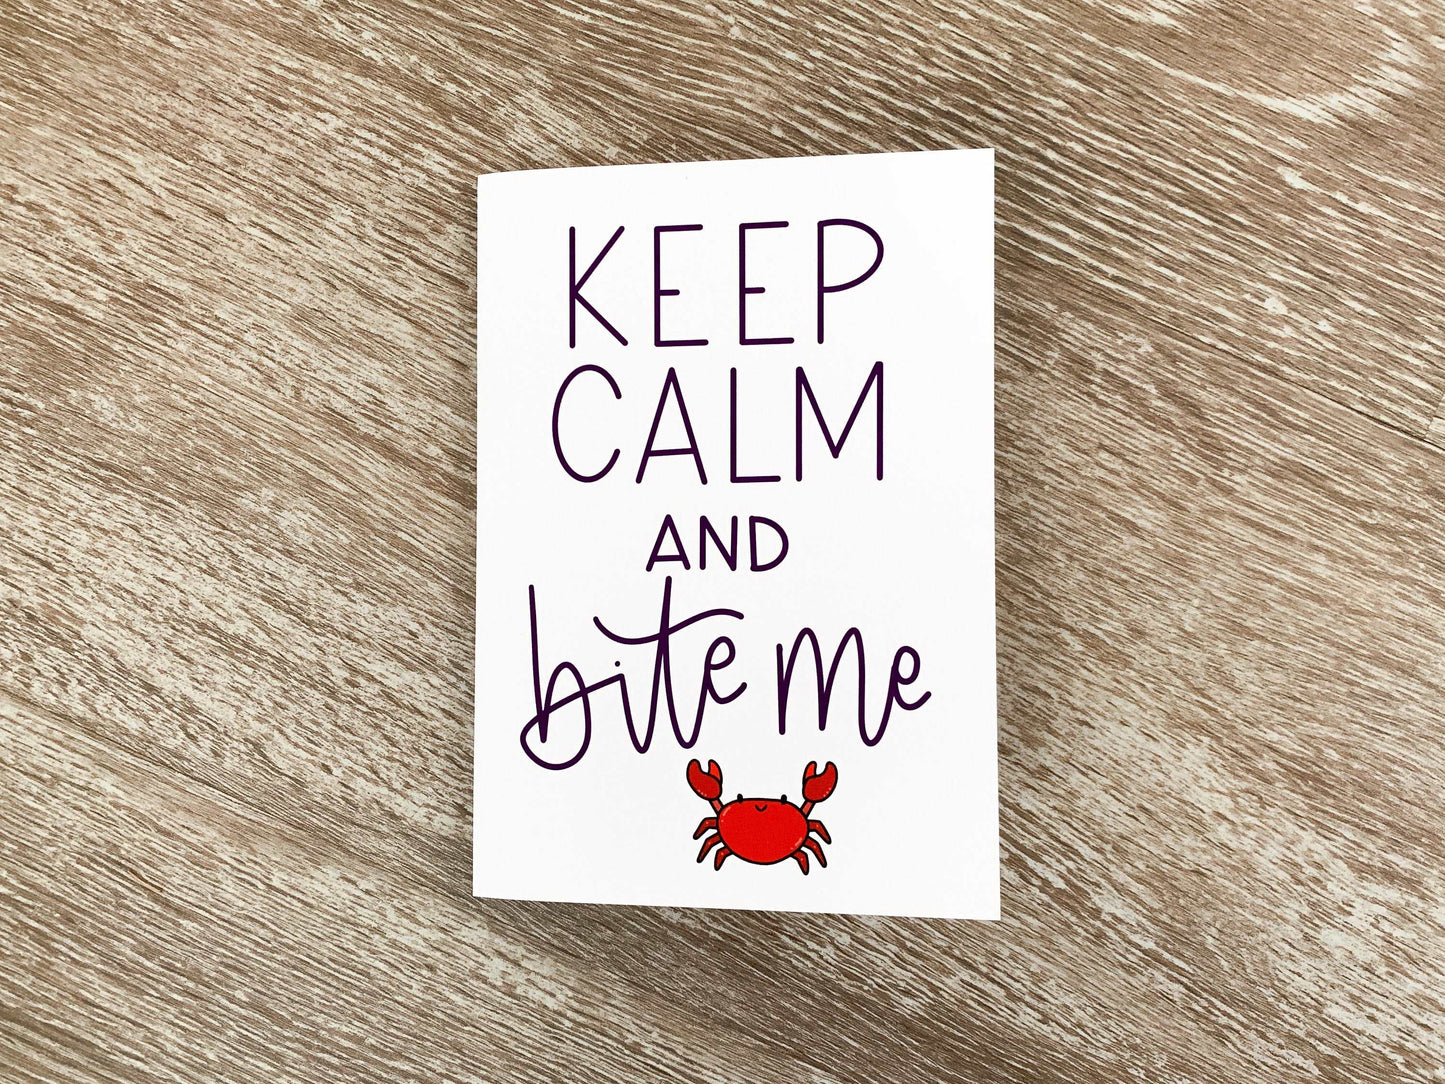 Funny Handmade Note Card Keep Calm and Bite Me by StoneDonut Design